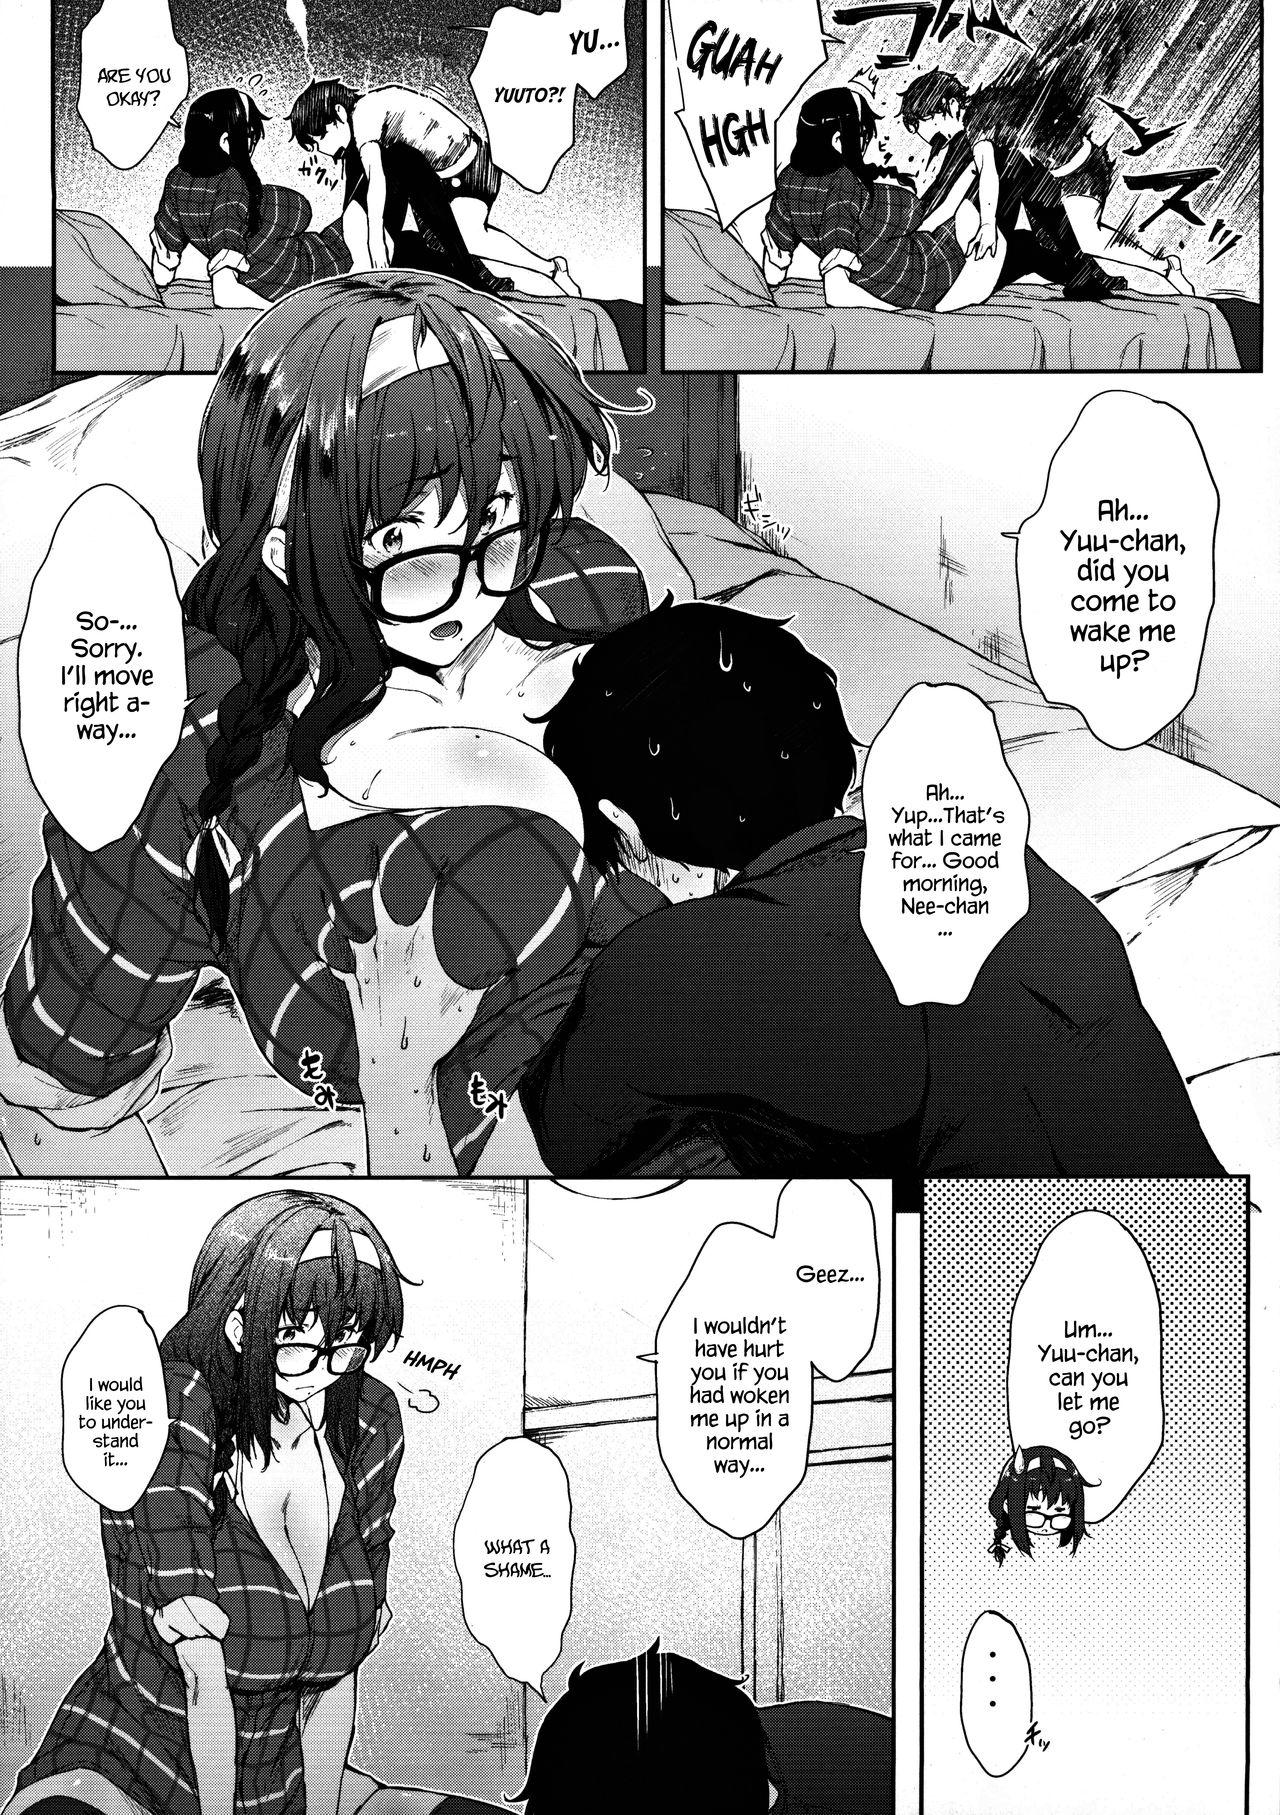 Bwc Babaa no Inu Ma ni Nee-chan to | With My Stepsister While My Mom's Not Home - Original Gloryholes - Page 5